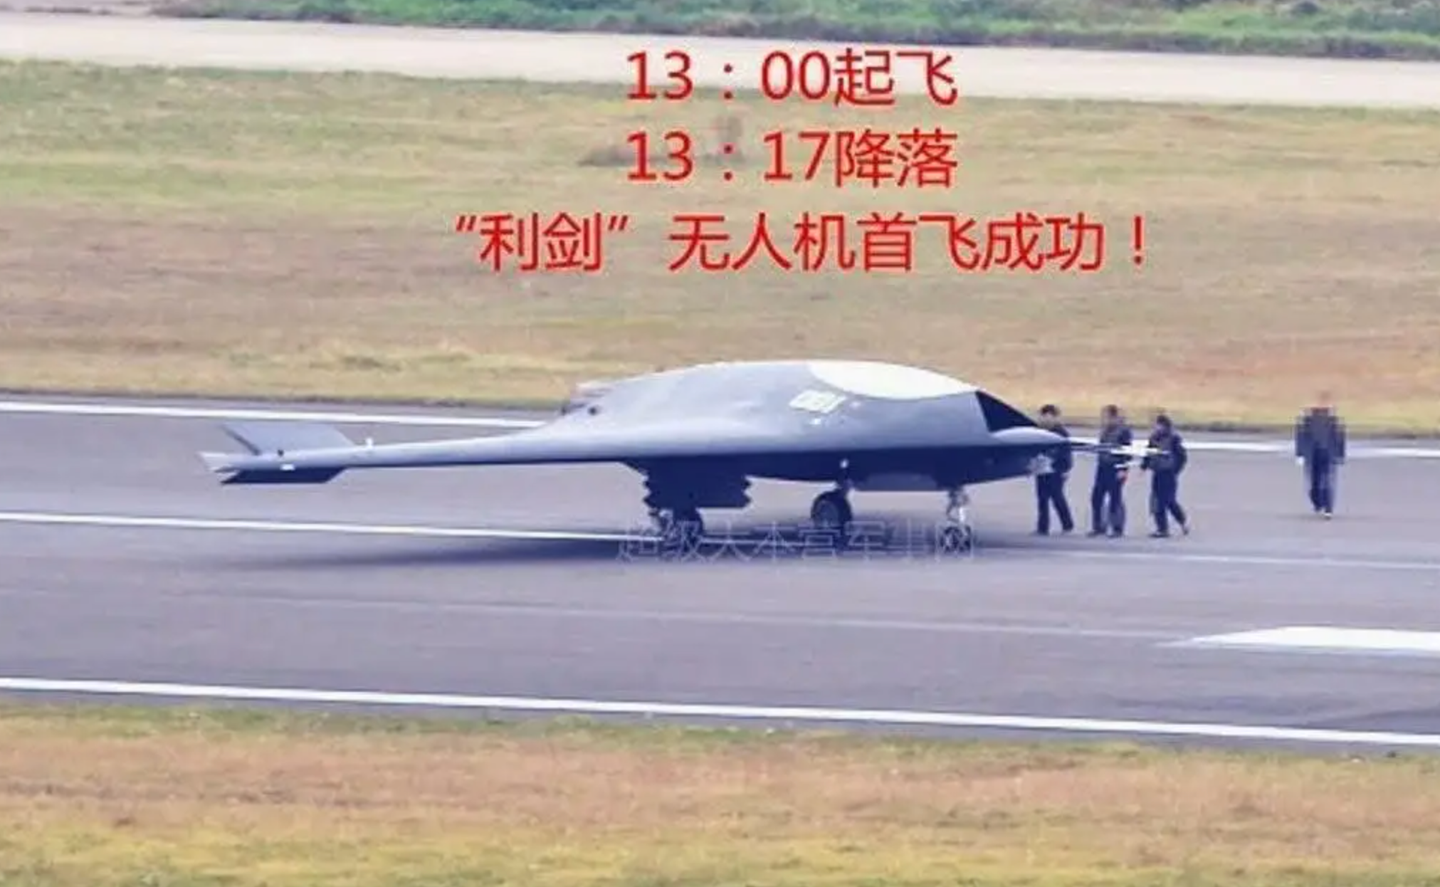 A GJ-11 prototype during early testing. The aircraft has since been <a href="https://www.twz.com/30111/china-showcases-stealthier-sharp-sword-unmanned-combat-air-vehicle-configuration" target="_blank" rel="noreferrer noopener">considerably refined</a> in terms of its low-observability airframe, addressing the completely exposed engine exhaust, for example. <em>Chinese internet</em>